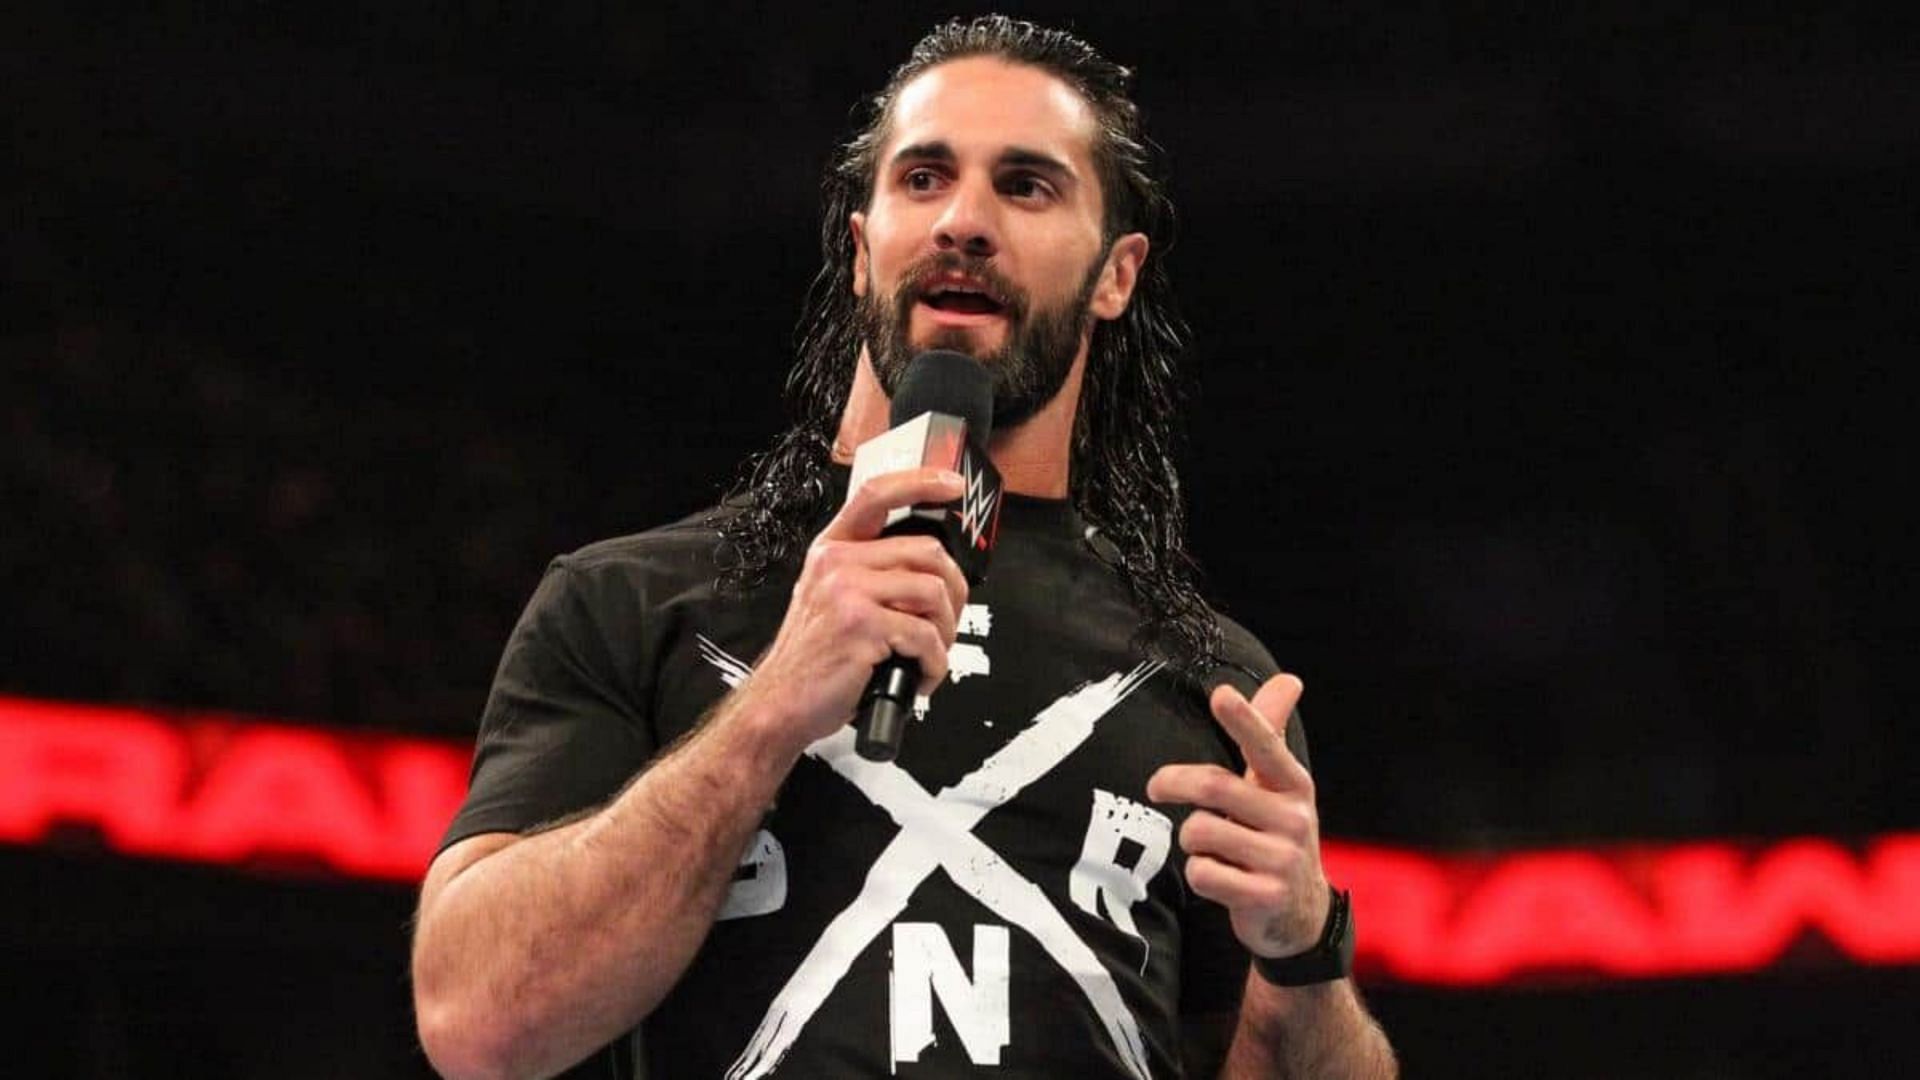 Seth Rollins recently defeated Montez Ford on RAW